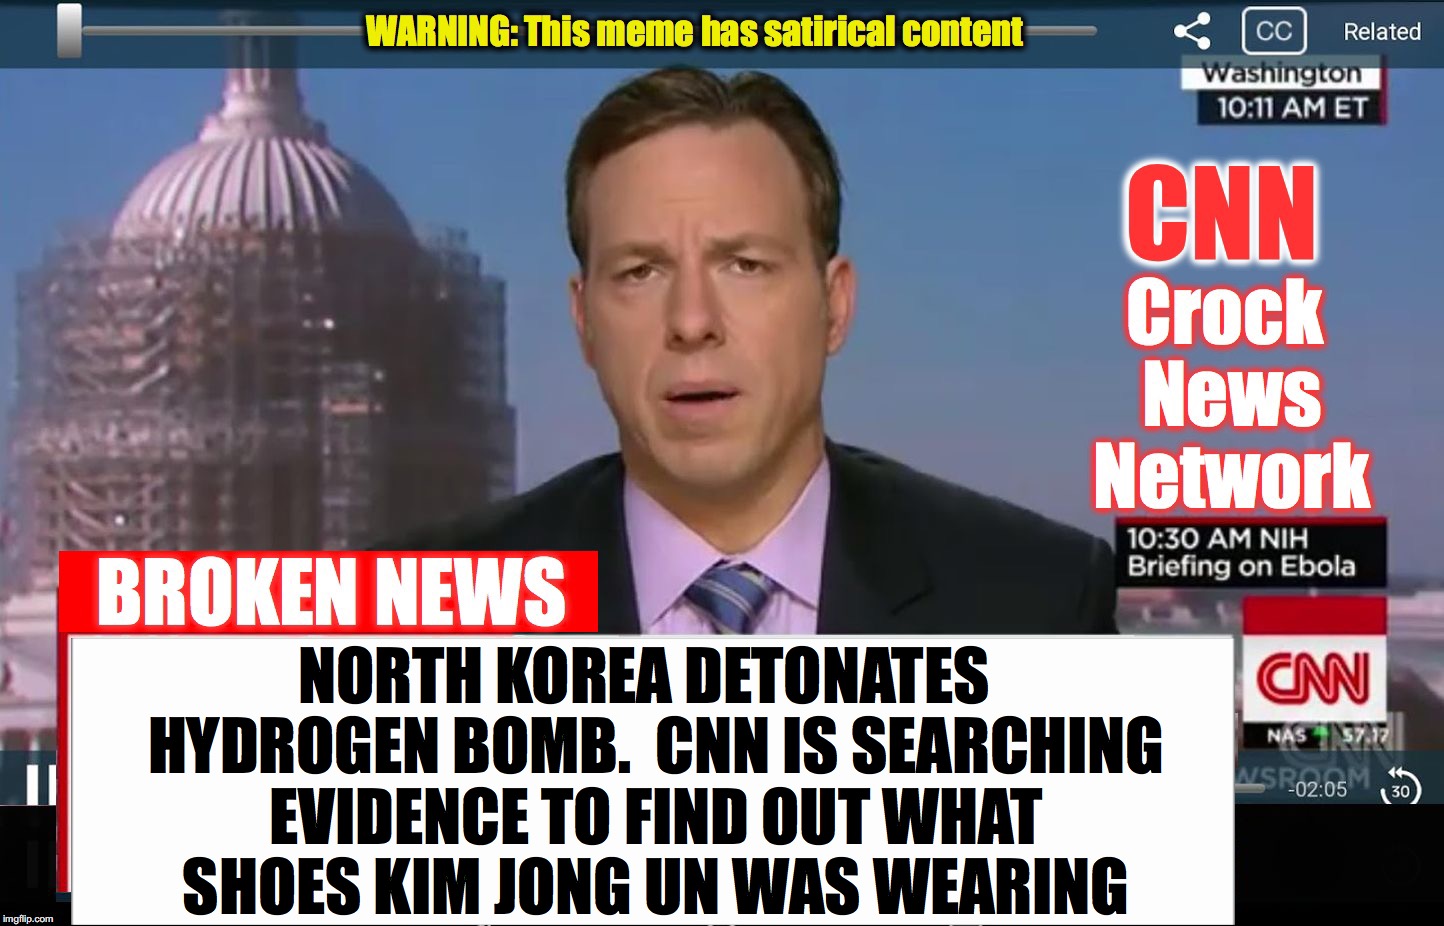 CNN Crock News Network | NORTH KOREA DETONATES  HYDROGEN BOMB.  CNN IS SEARCHING EVIDENCE TO FIND OUT WHAT SHOES KIM JONG UN WAS WEARING | image tagged in cnn crock news network | made w/ Imgflip meme maker